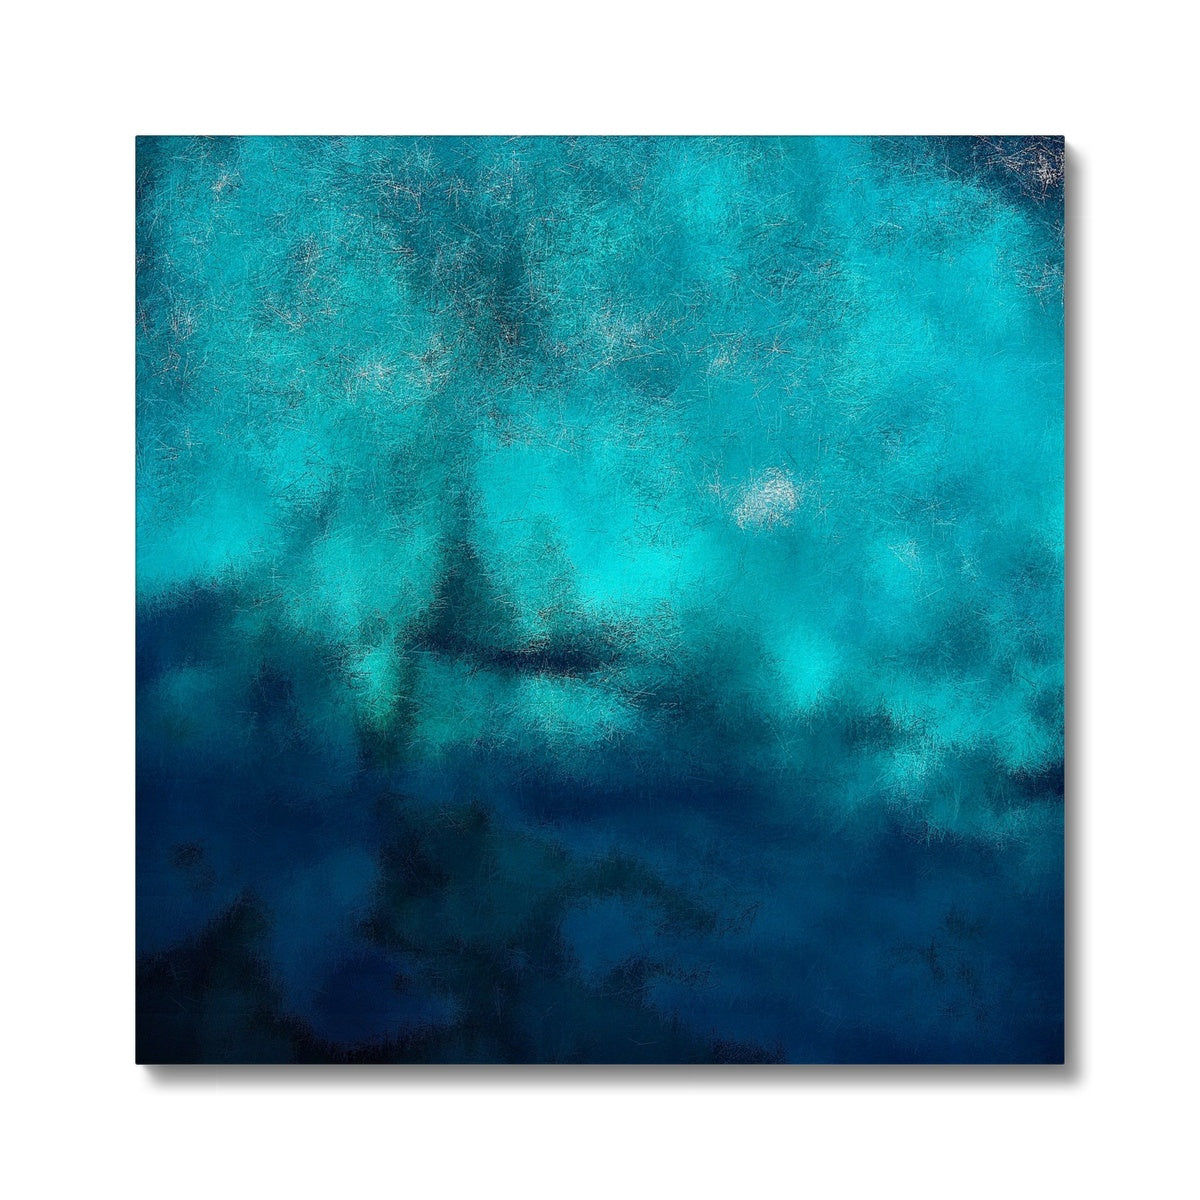 Diving Off Kos Greece Painting | Canvas From Scotland-Contemporary Stretched Canvas Prints-World Art Gallery-24"x24"-Paintings, Prints, Homeware, Art Gifts From Scotland By Scottish Artist Kevin Hunter